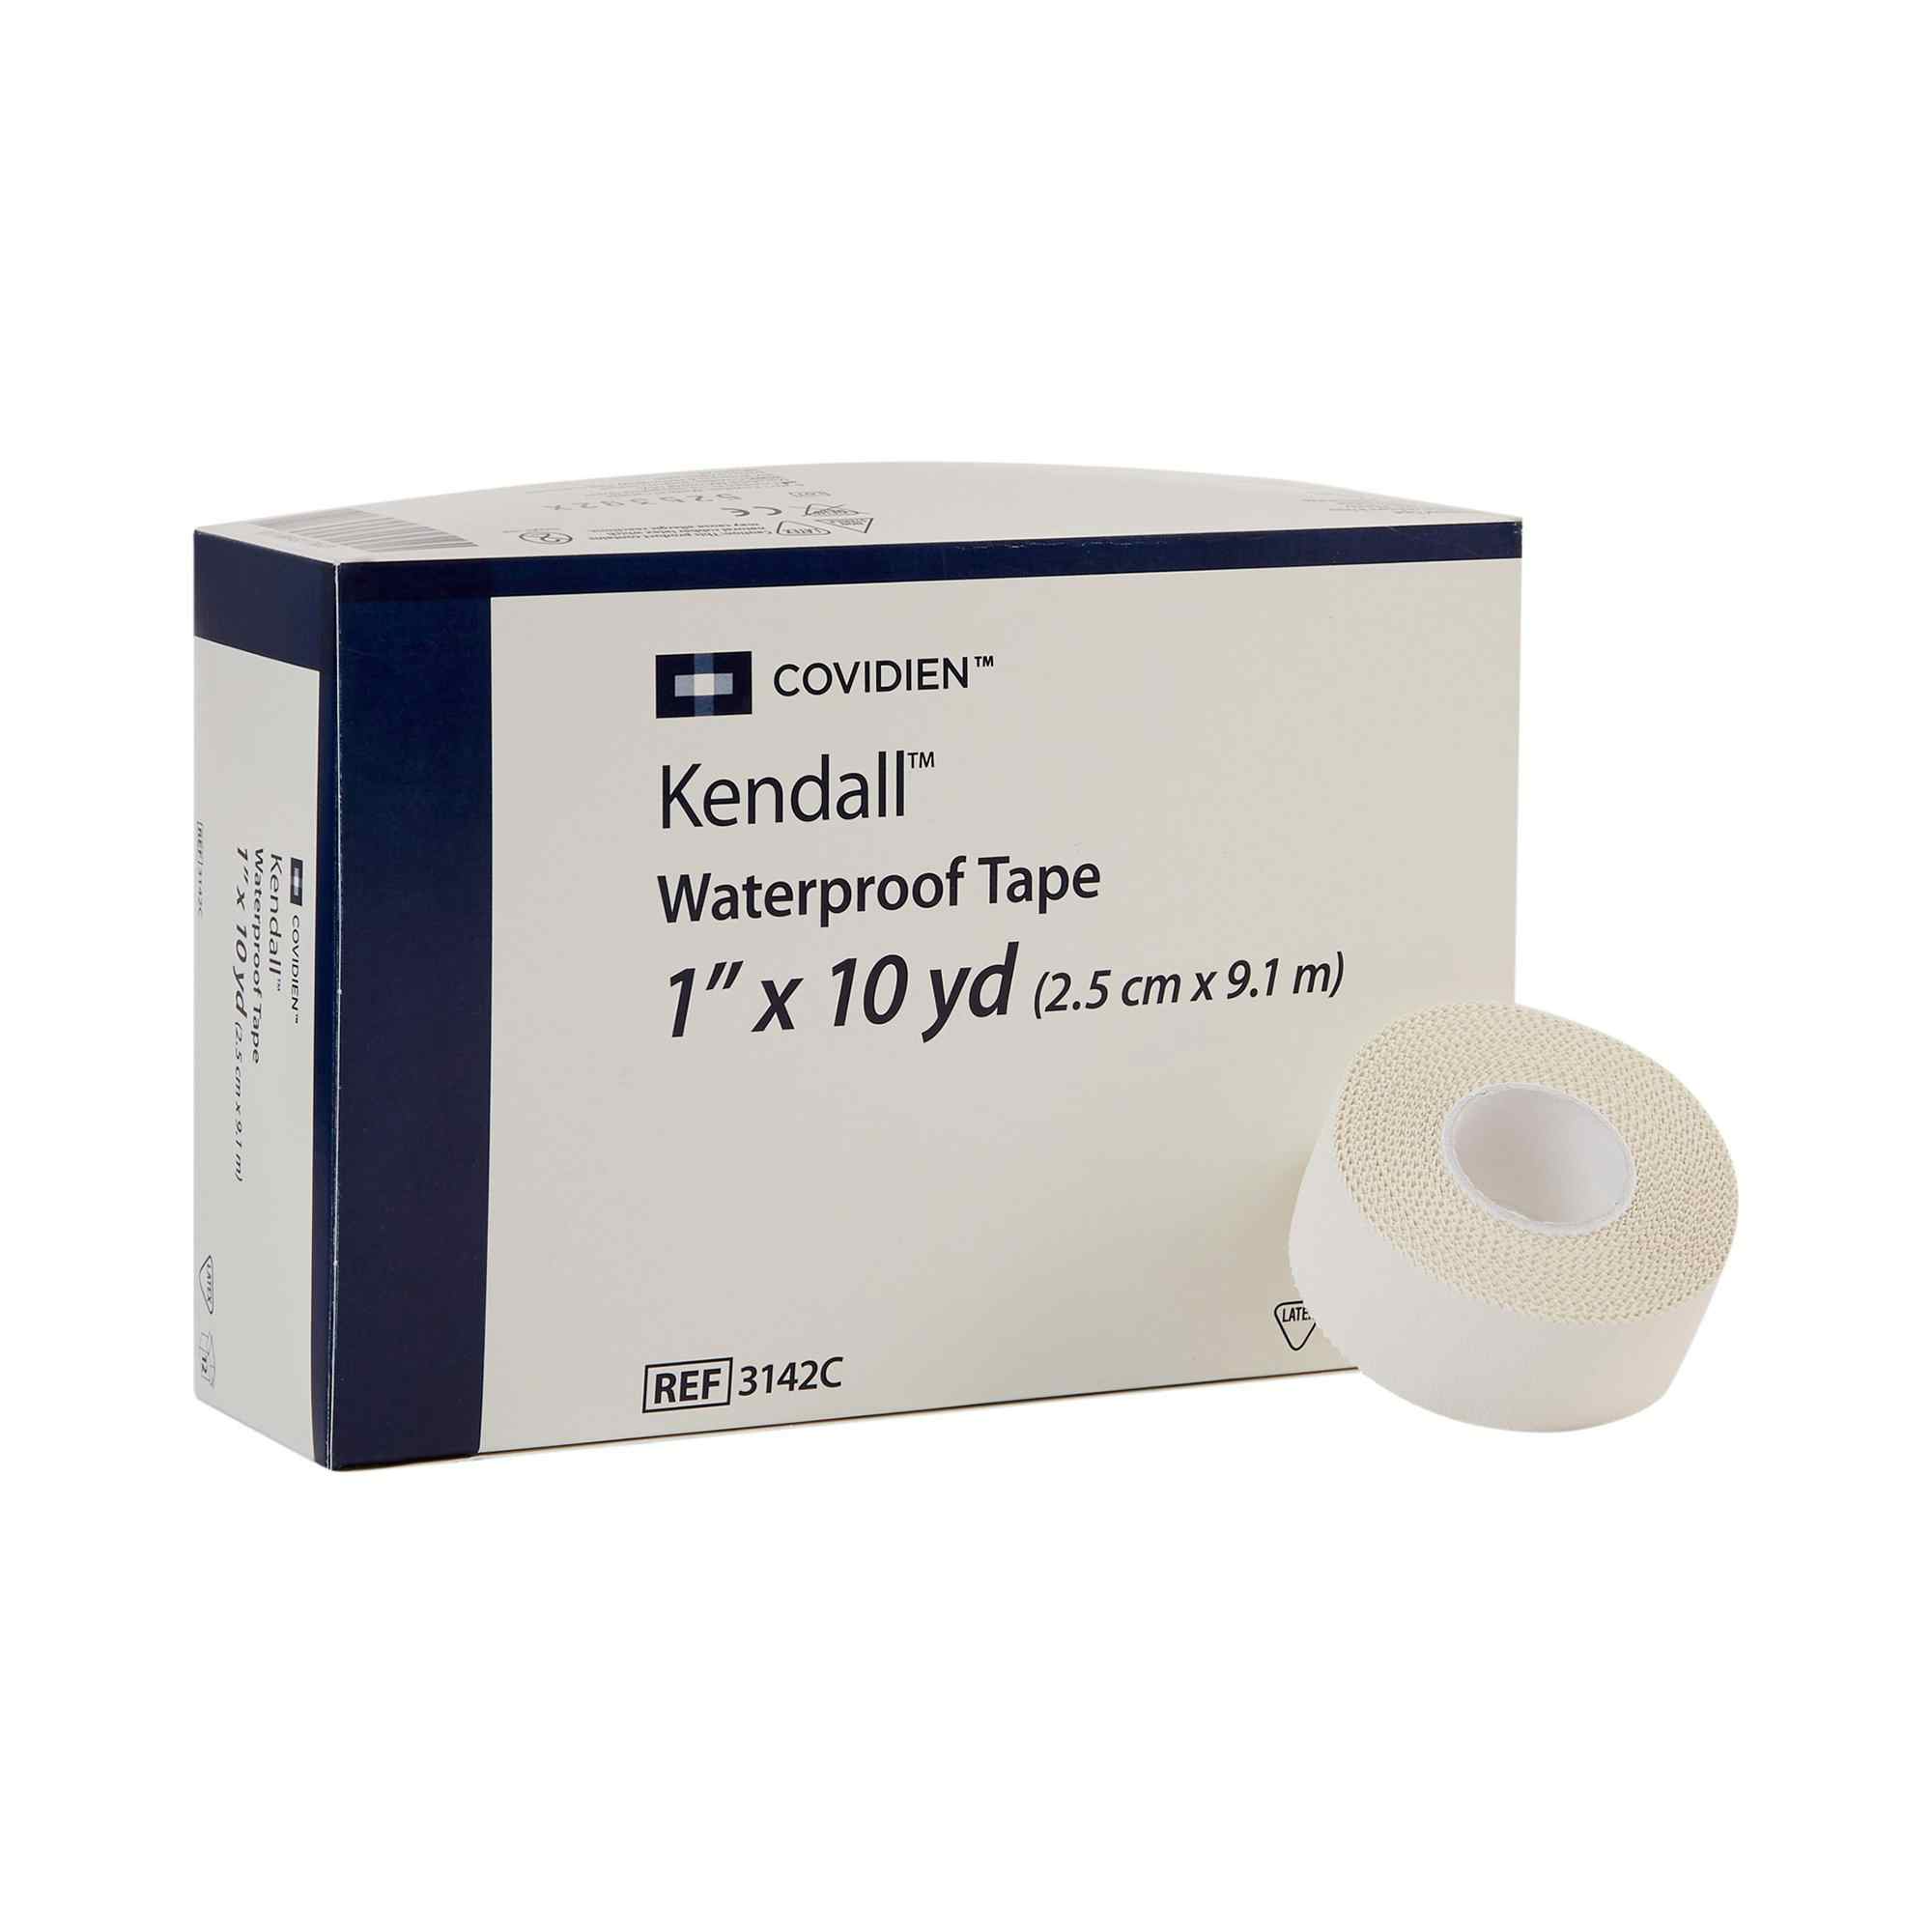 Kendall Medical Tape, 1 Inch x 10 Yard, 3142C, Box of 12